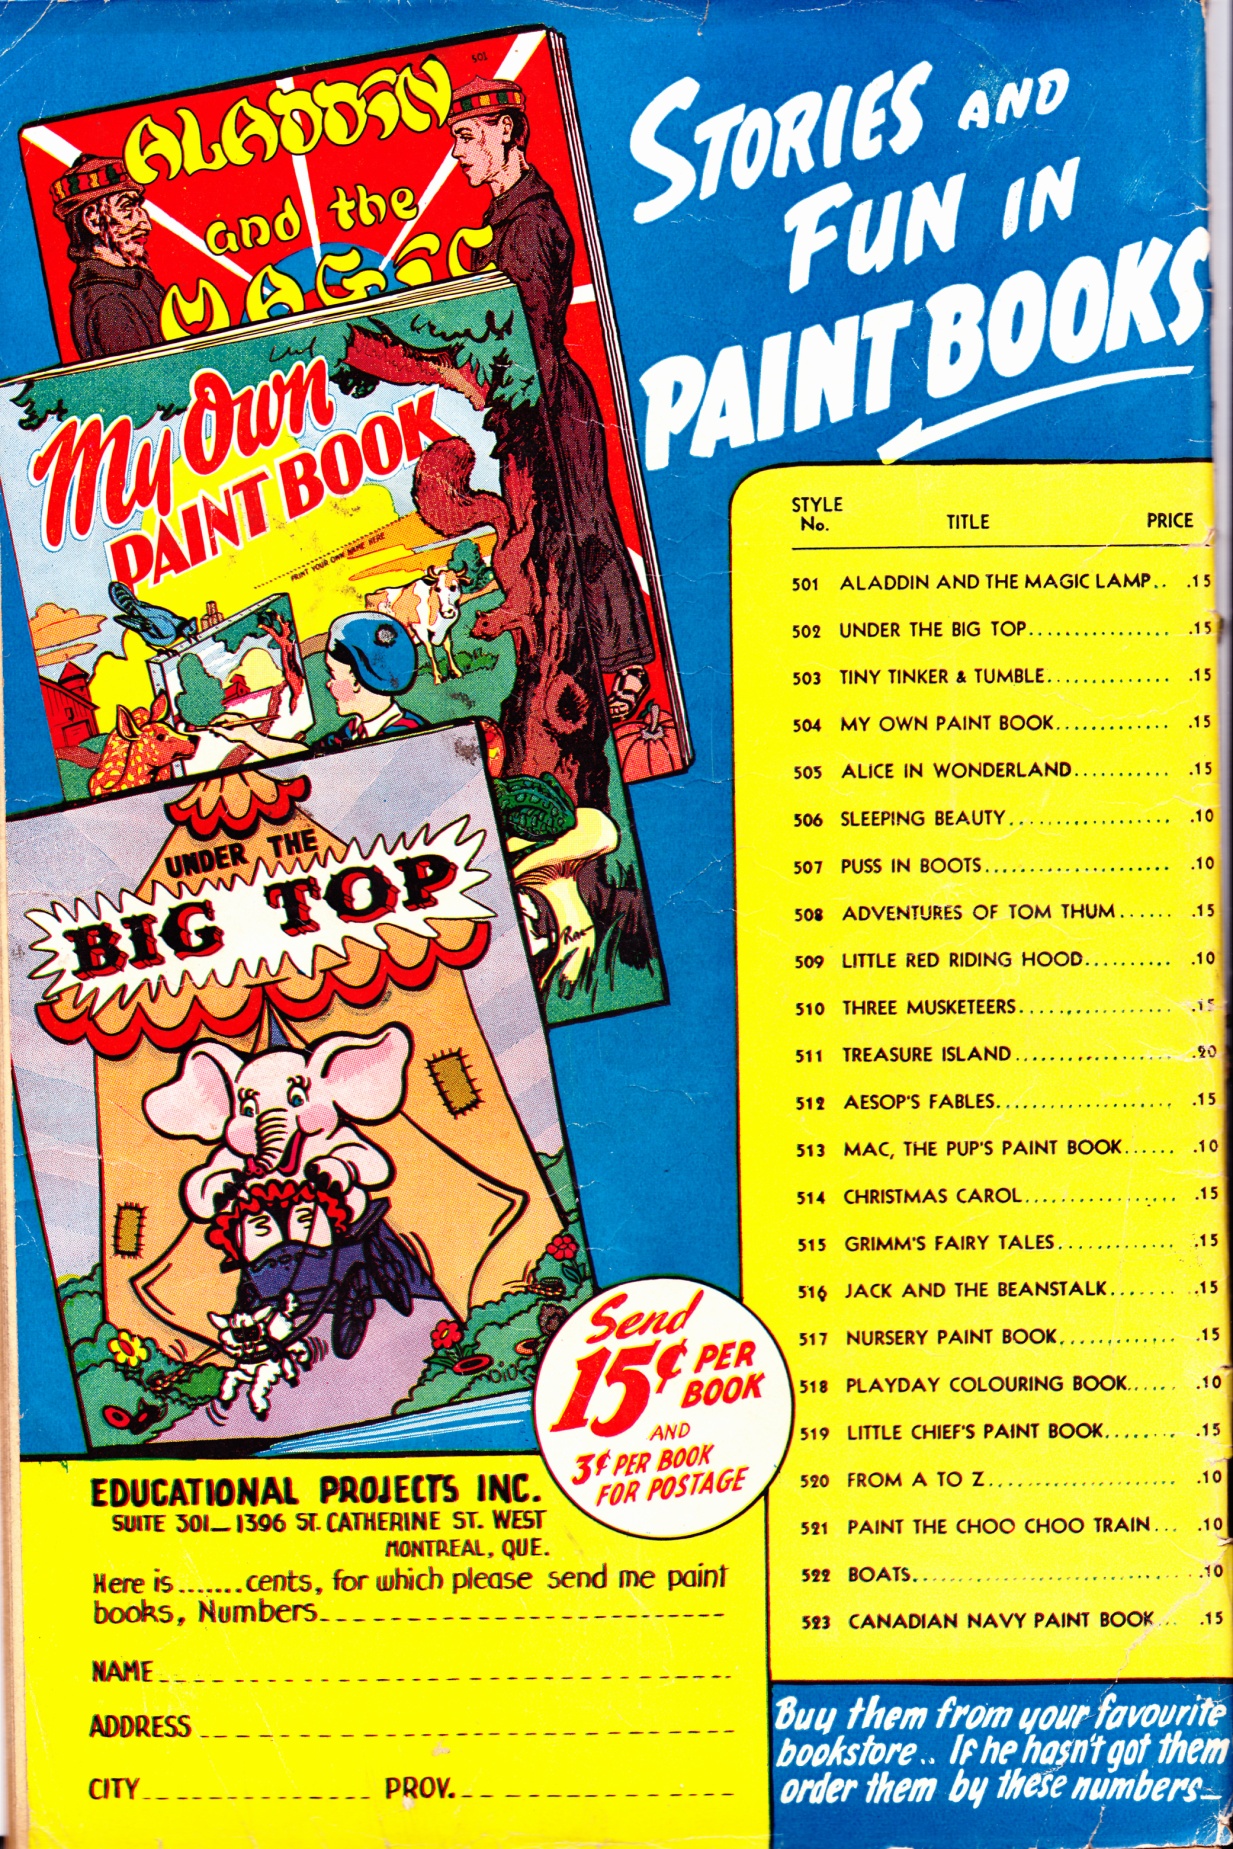 C:\Users\Robert\Documents\CARTOONING ILLUSTRATION ANIMATION\IMAGE COMIC BOOK COVERS\Advertising, Canadian Heroes, 4-1, June 1944, bc.jpg